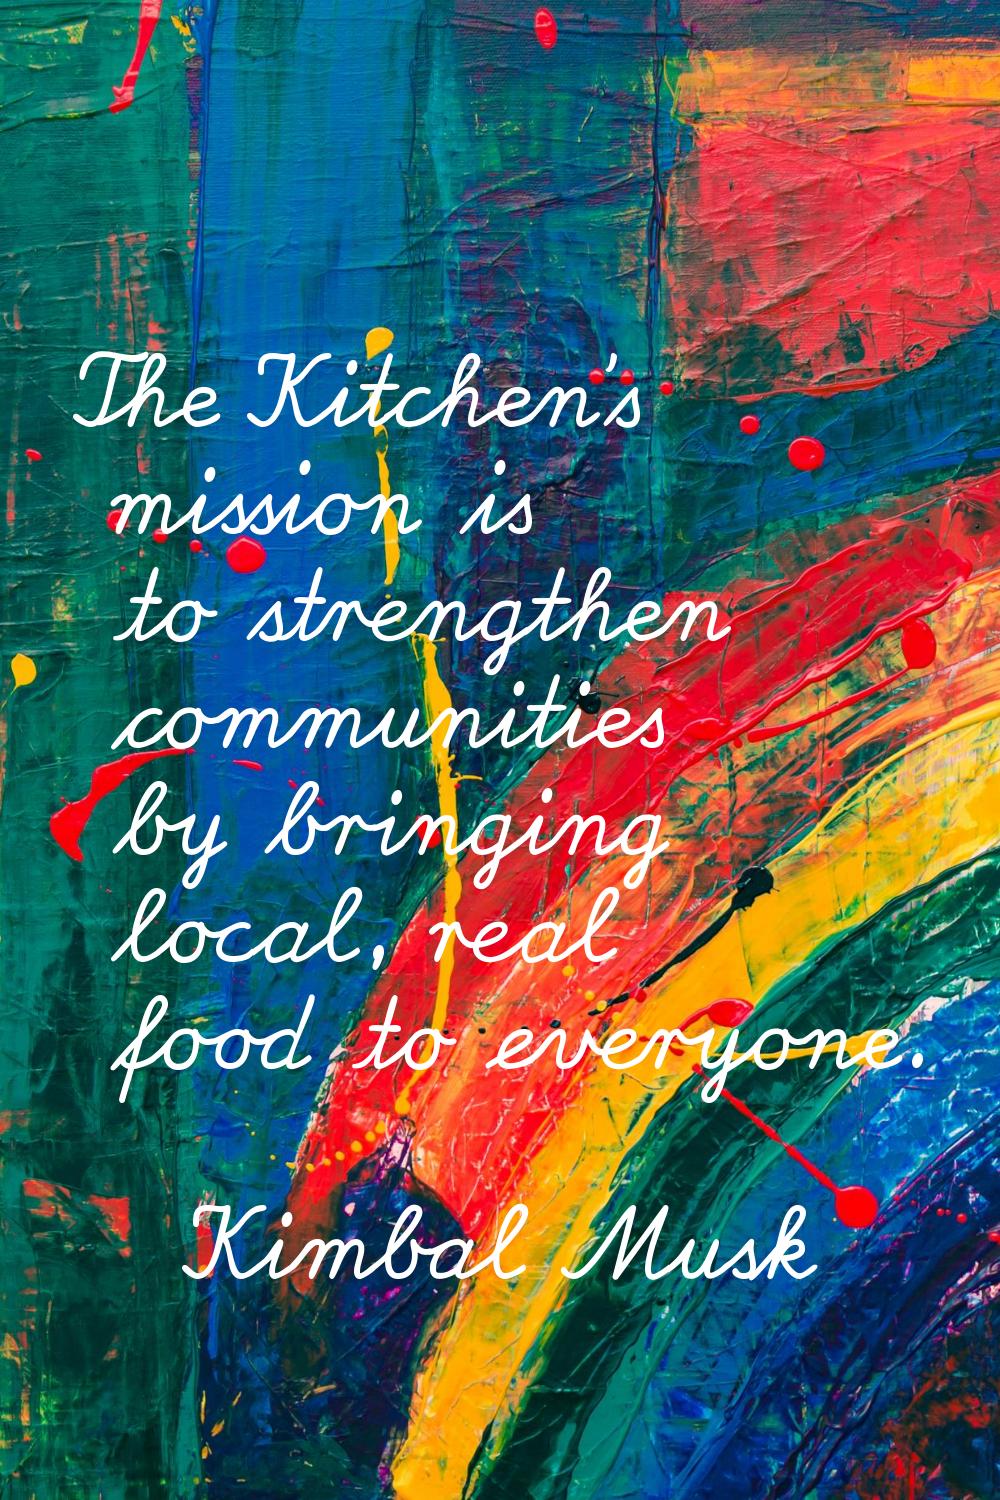 The Kitchen's mission is to strengthen communities by bringing local, real food to everyone.